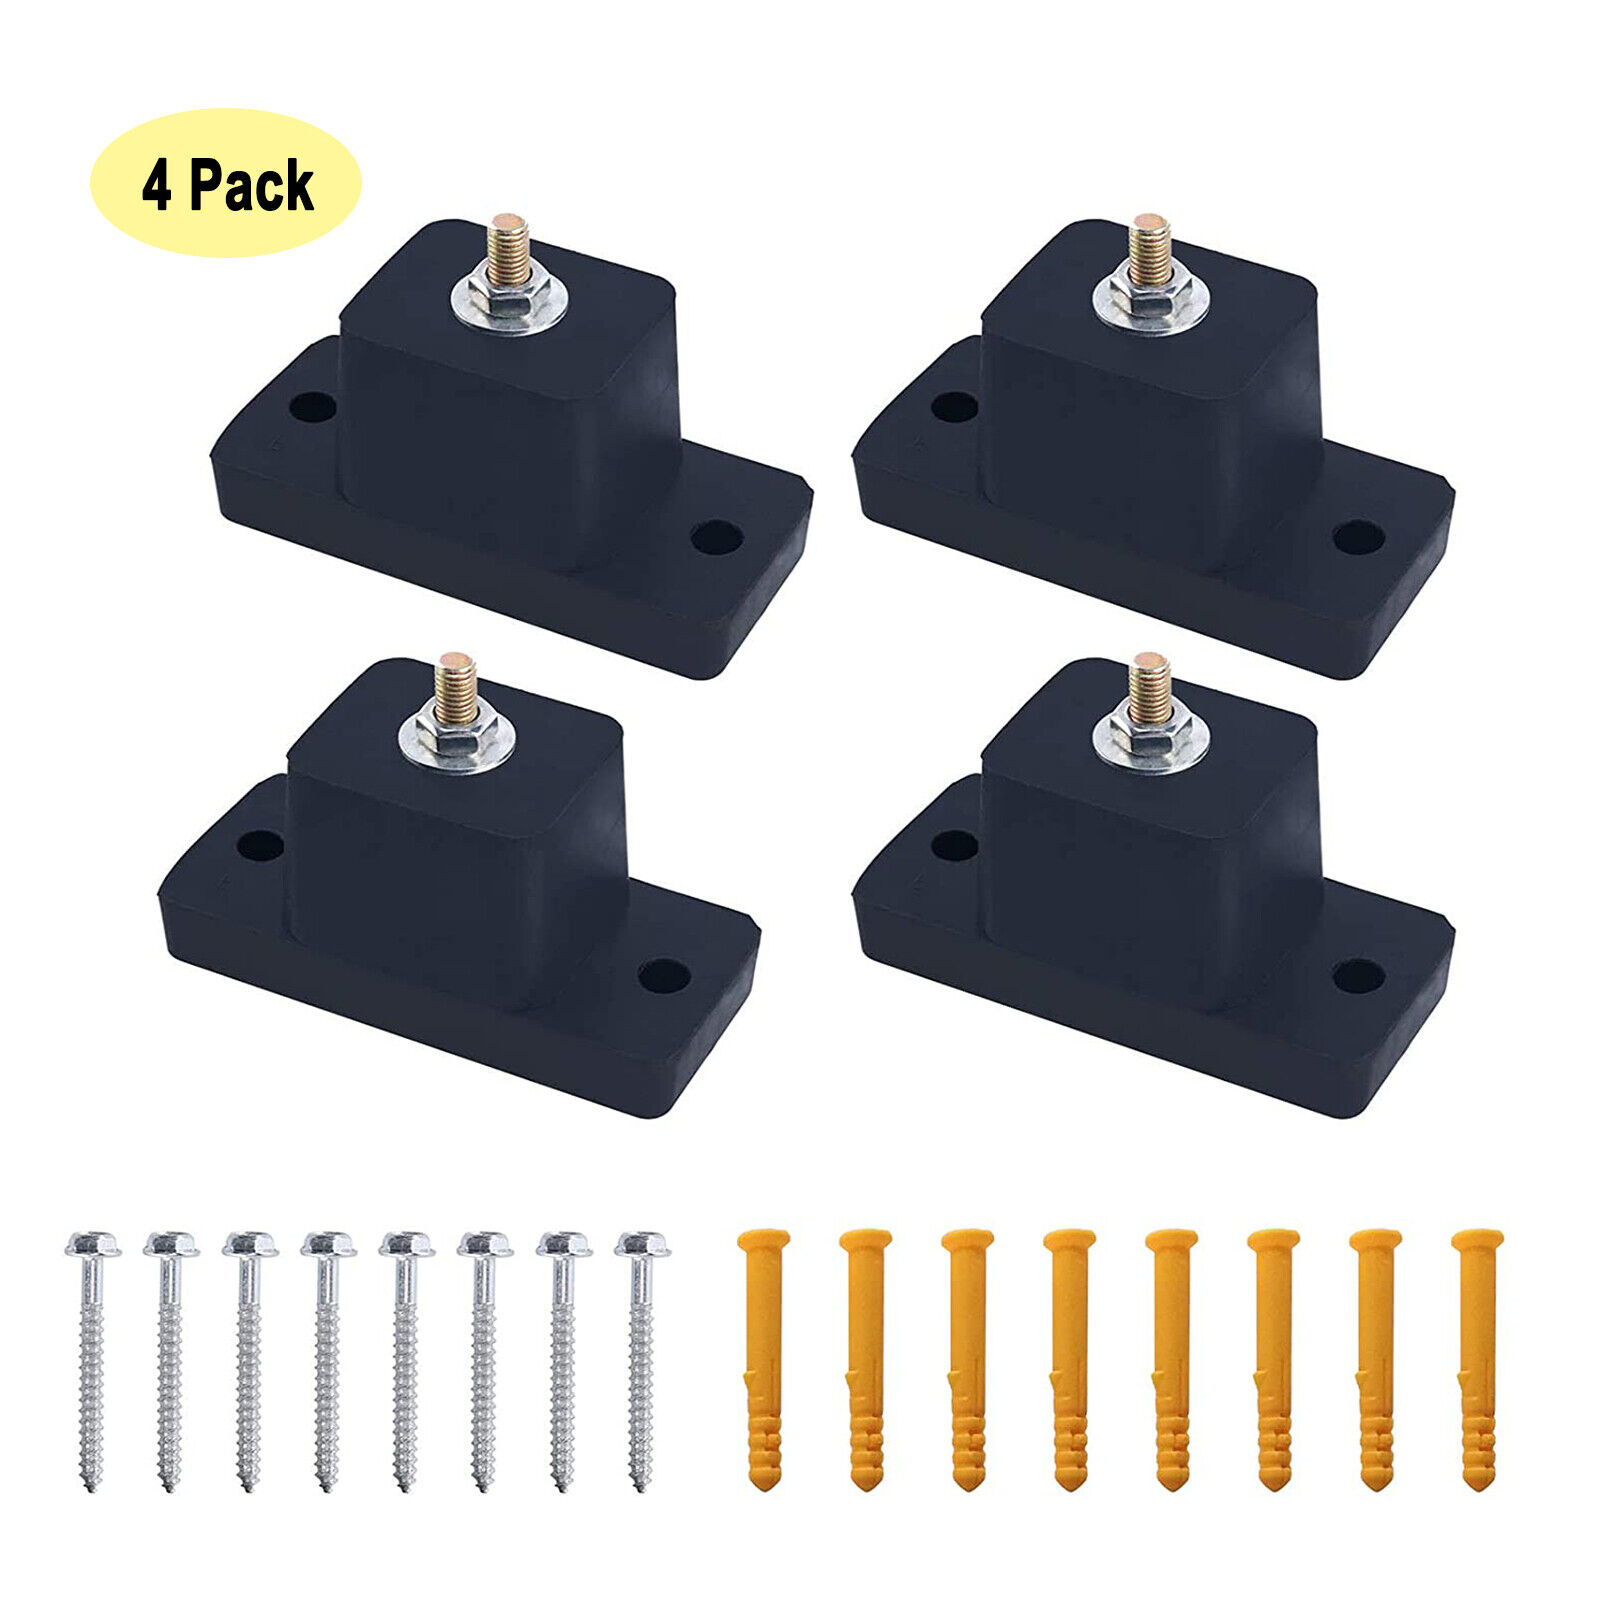 4Pack Rubber Vibration Isolator Durable Outdoor Air Conditioner Mounting Bracket